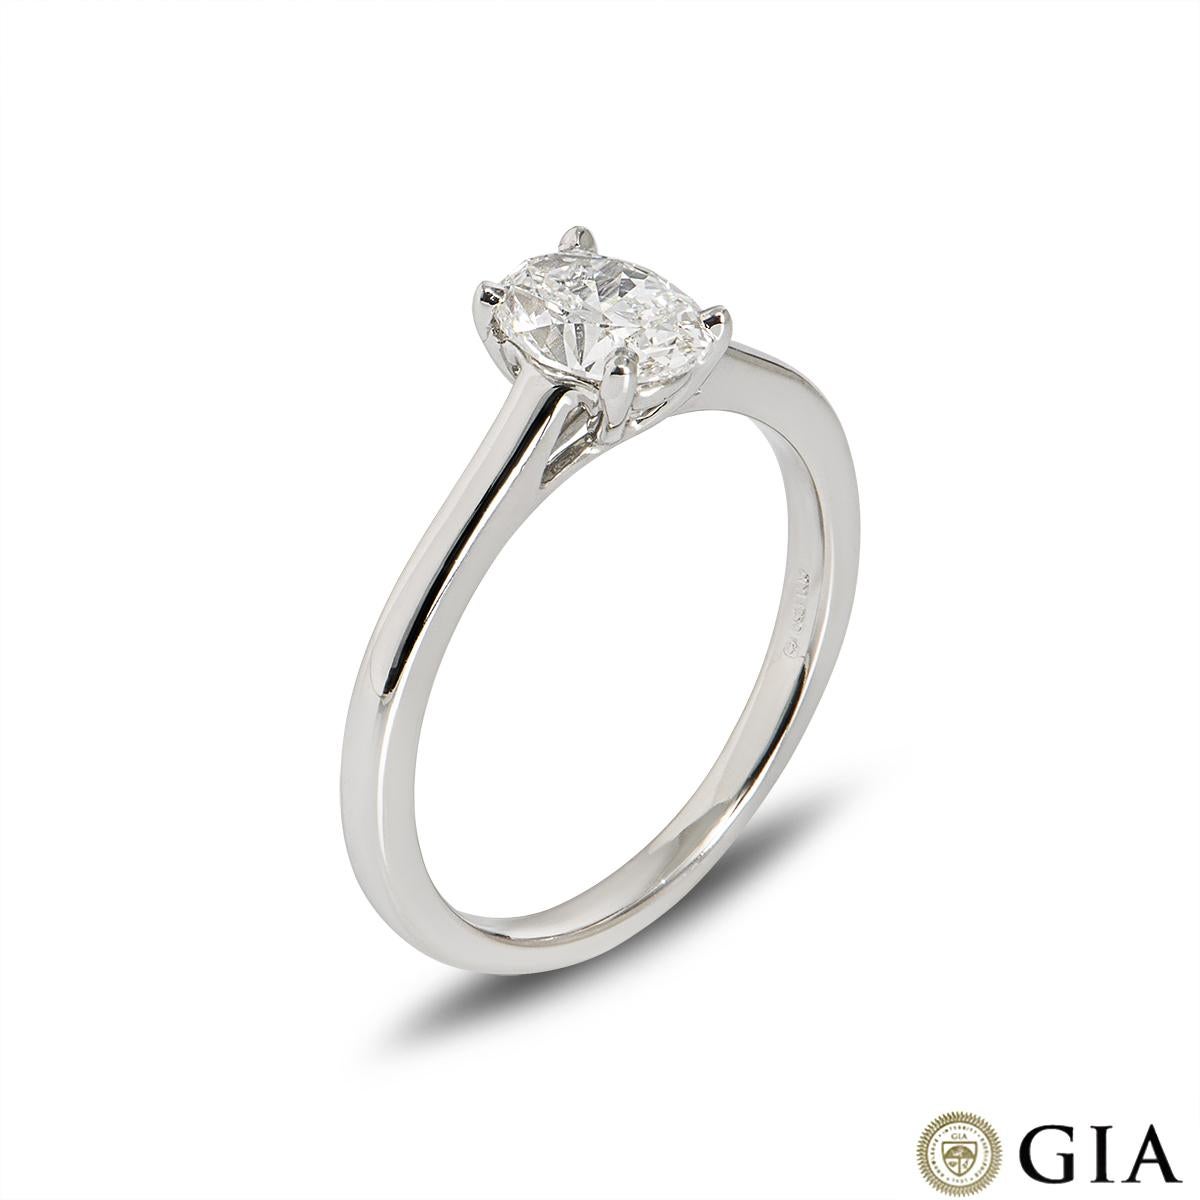 A stunning 18k white gold diamond solitaire engagement ring. The solitaire ring comprises of an oval cut diamond set to the centre in a four claw setting weighing 0.80ct, F colour and VS2 clarity. The ring has a gross weight of 3.02 grams and is